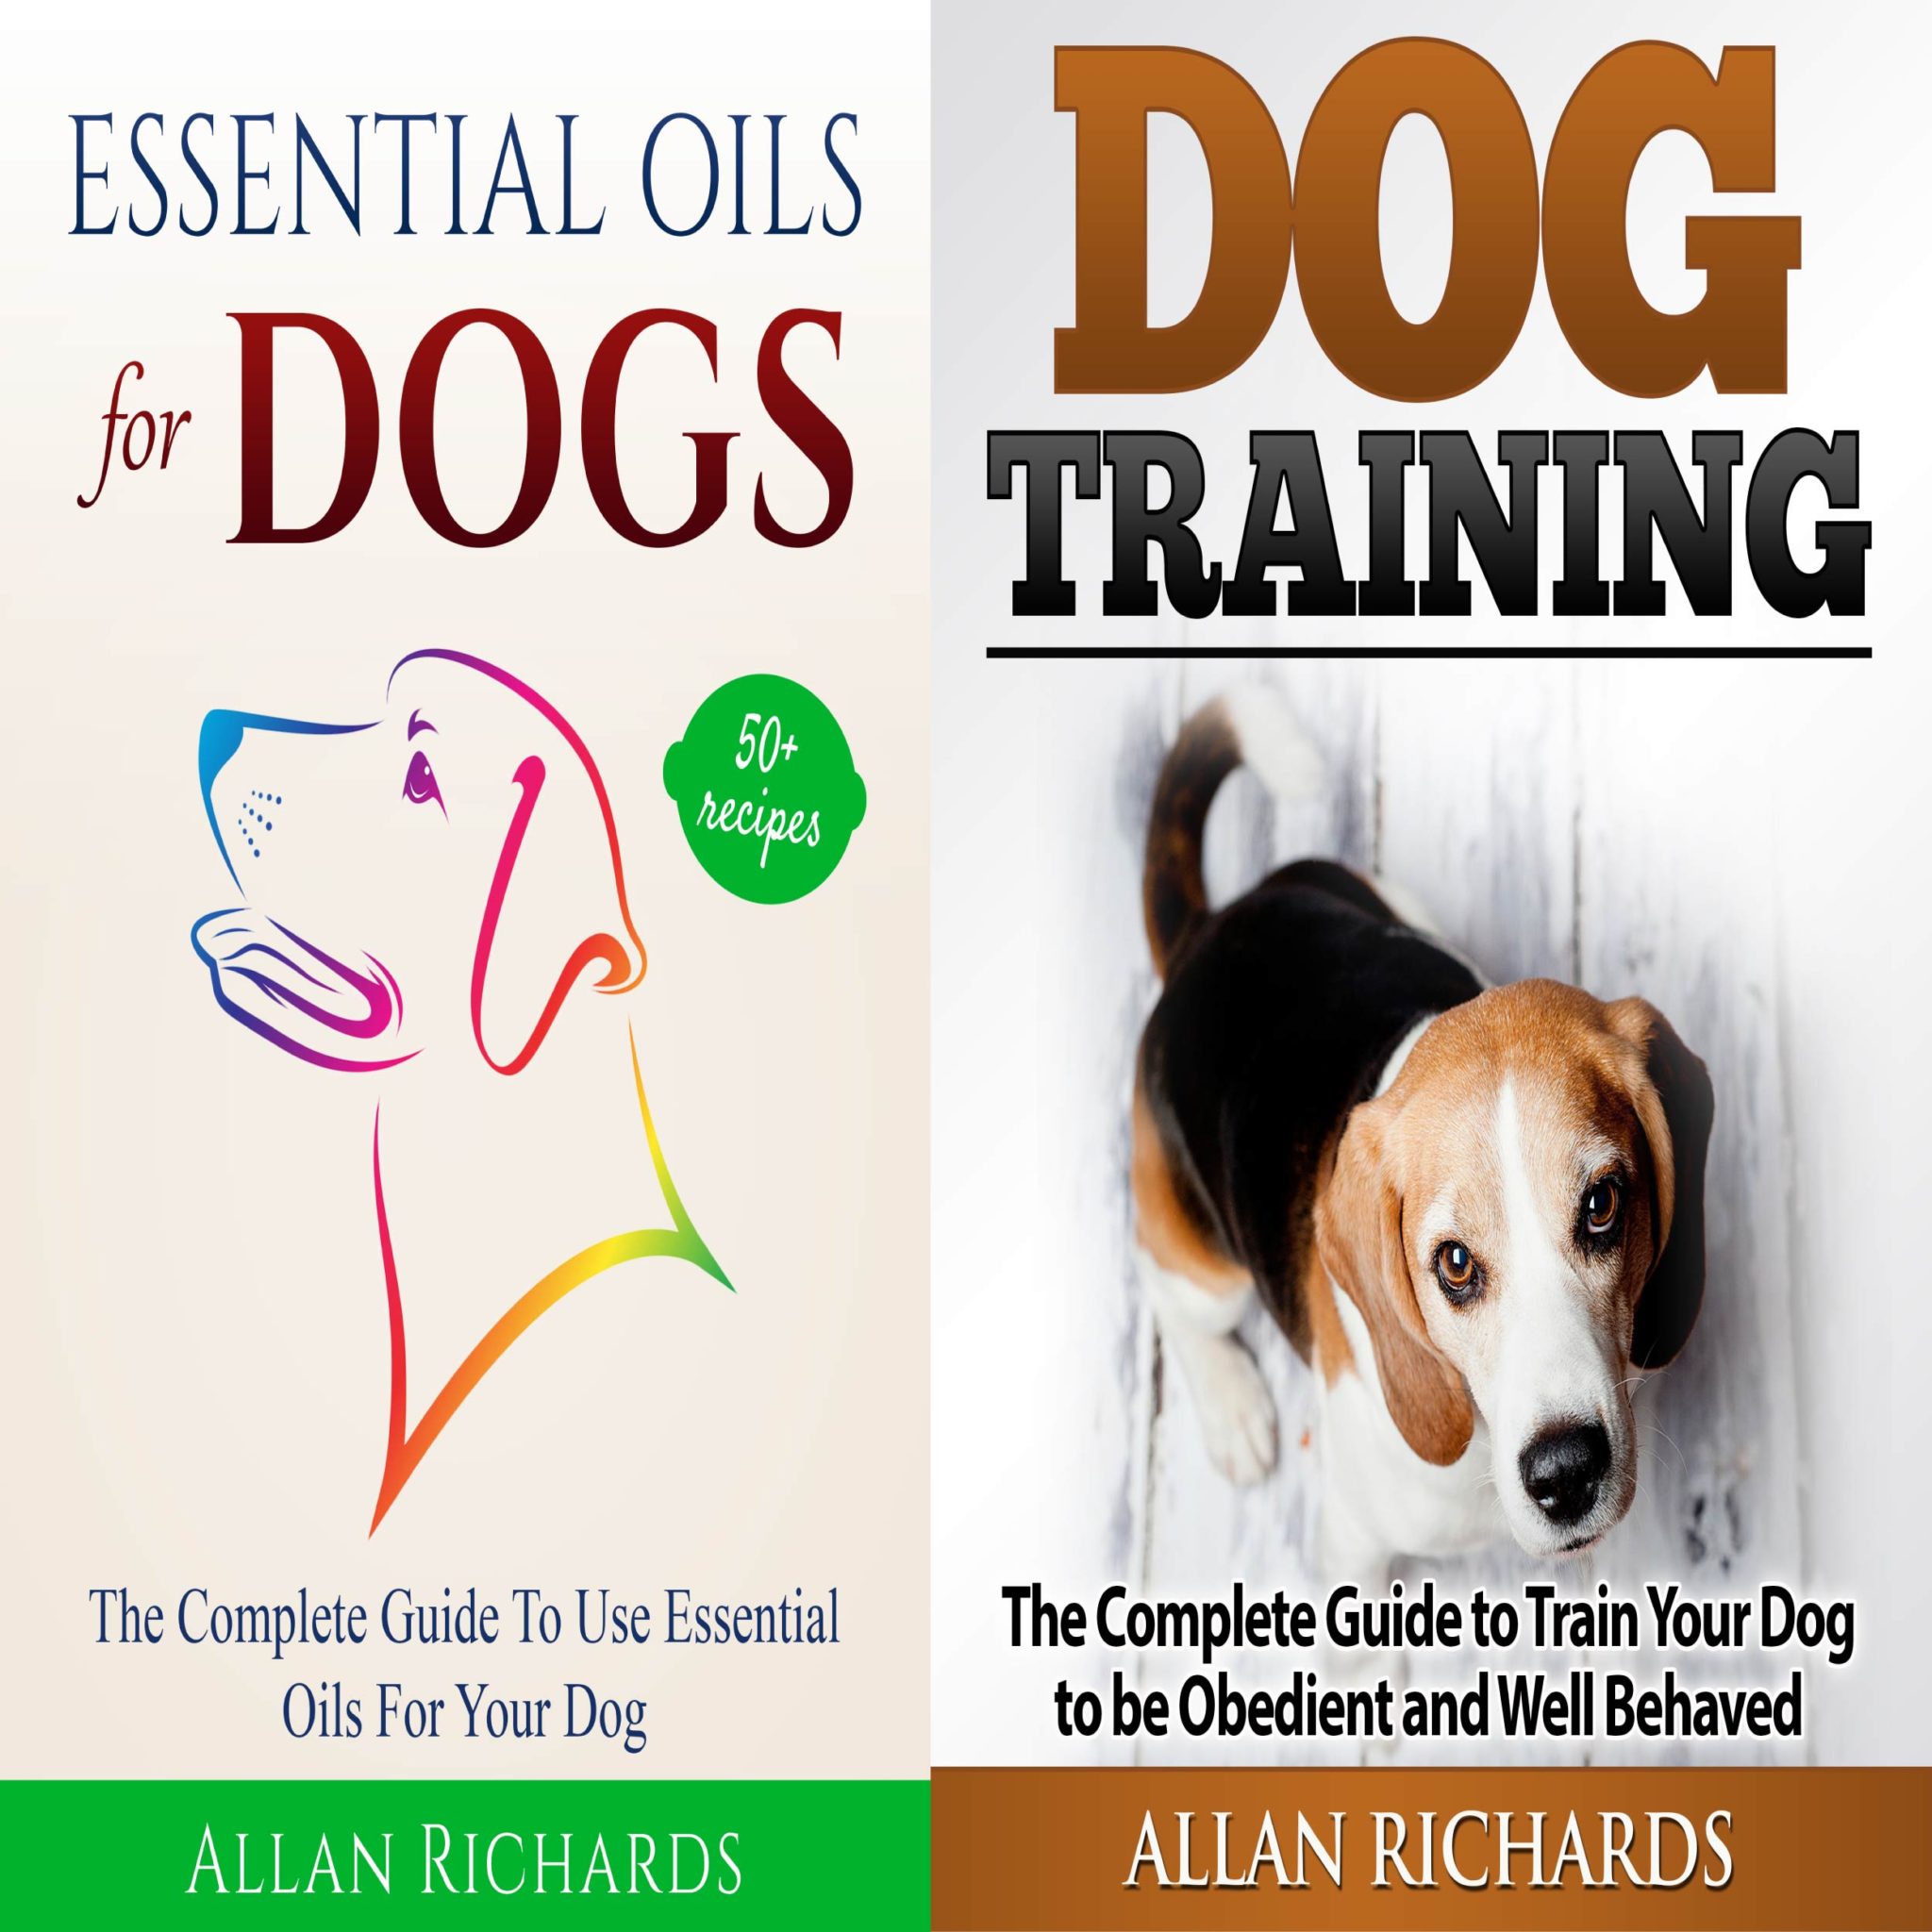 FREE: Dog Training & Essential Oils for Dogs by Allan Ricahrds